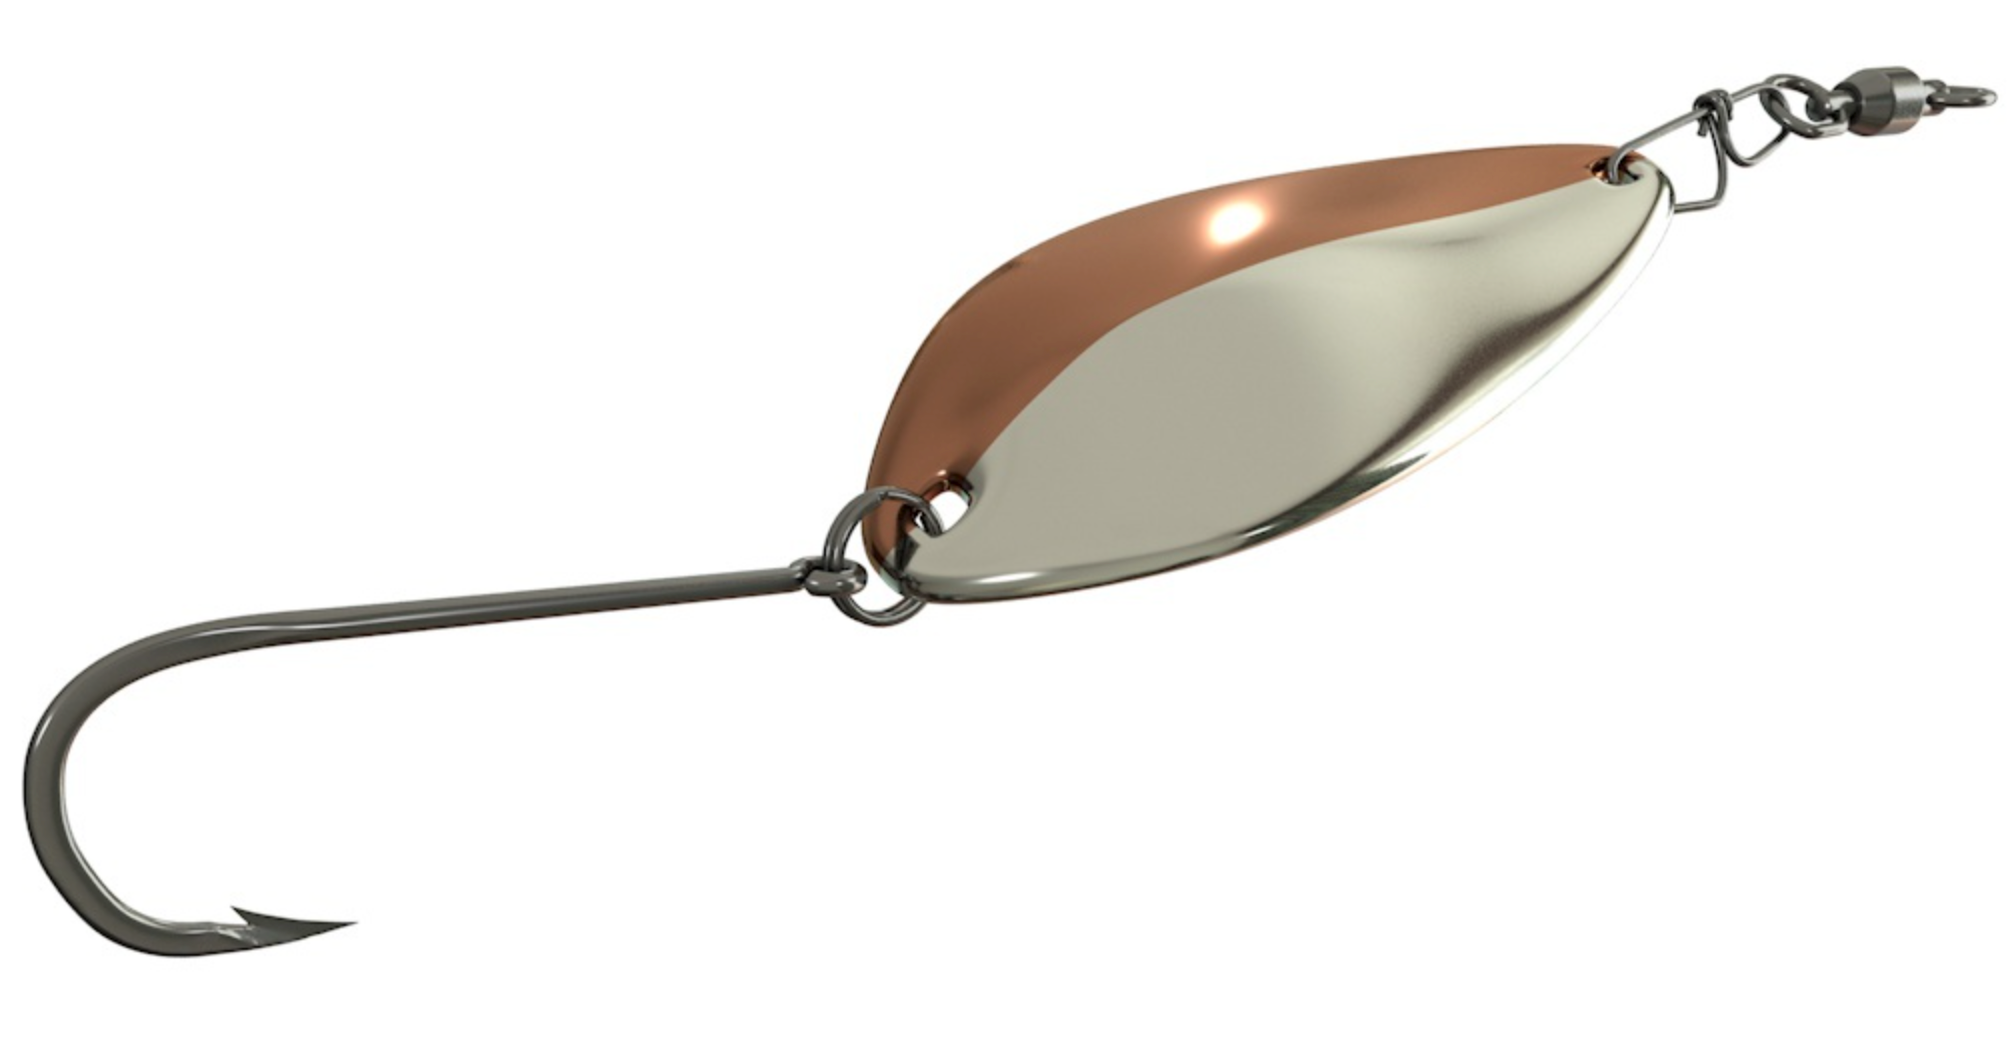 trout spoon, trout spoon Suppliers and Manufacturers at